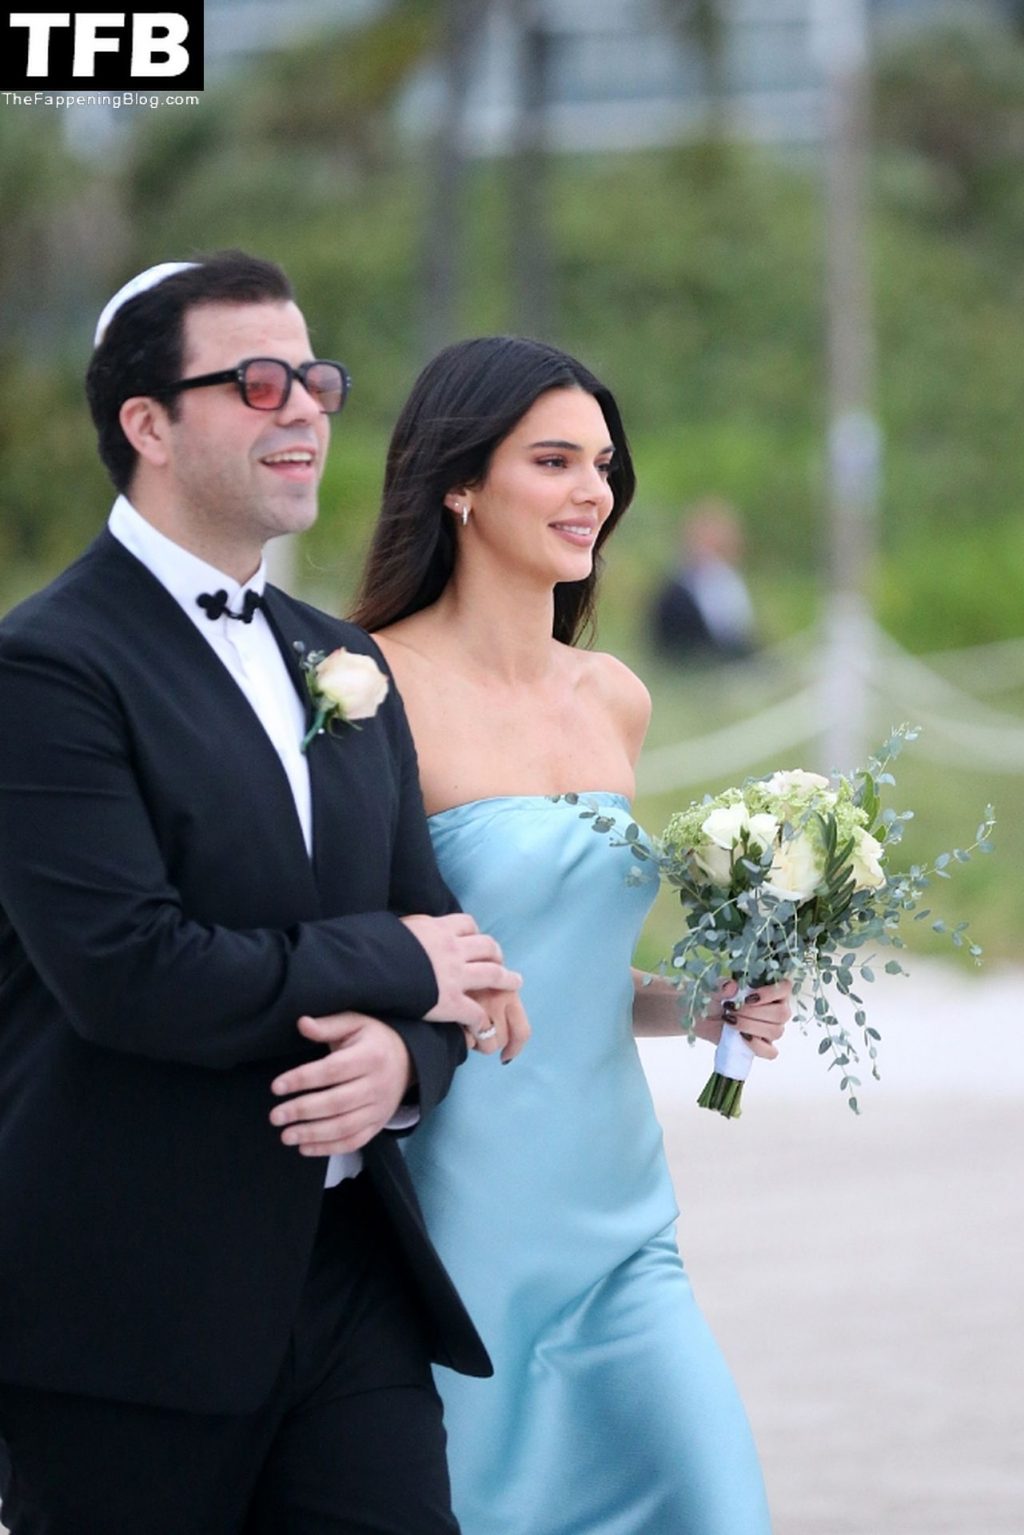 Kendall Jenner &amp; Bella Hadid Look Radiant as Barefoot Bridesmaids at a Beach Wedding in Miami (90 Photos)